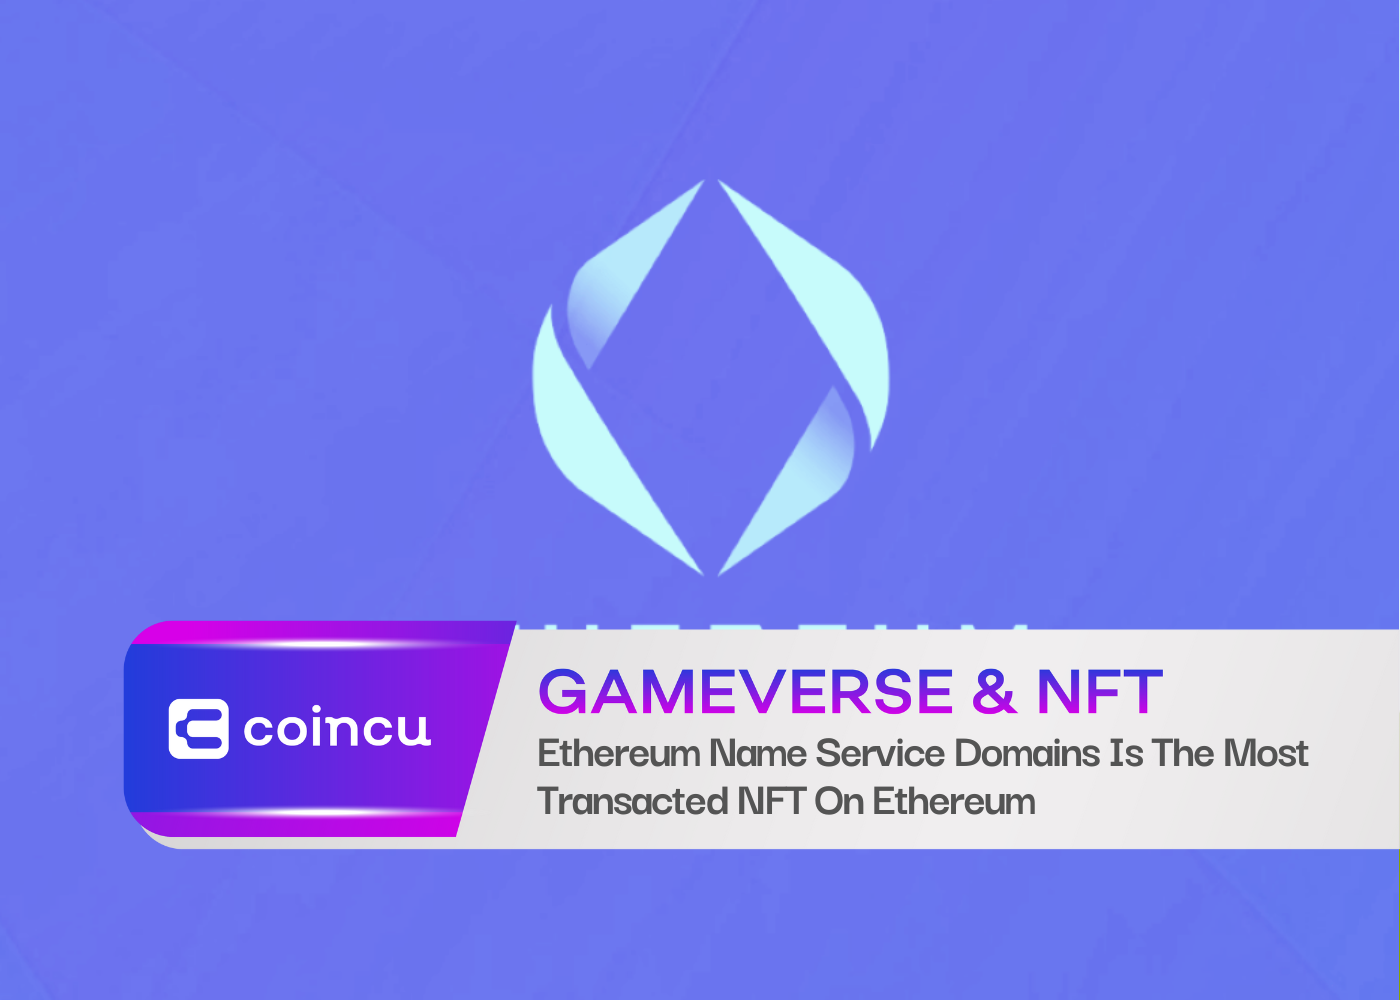 Ethereum Name Service Domains Is The Most Transacted NFT On Ethereum